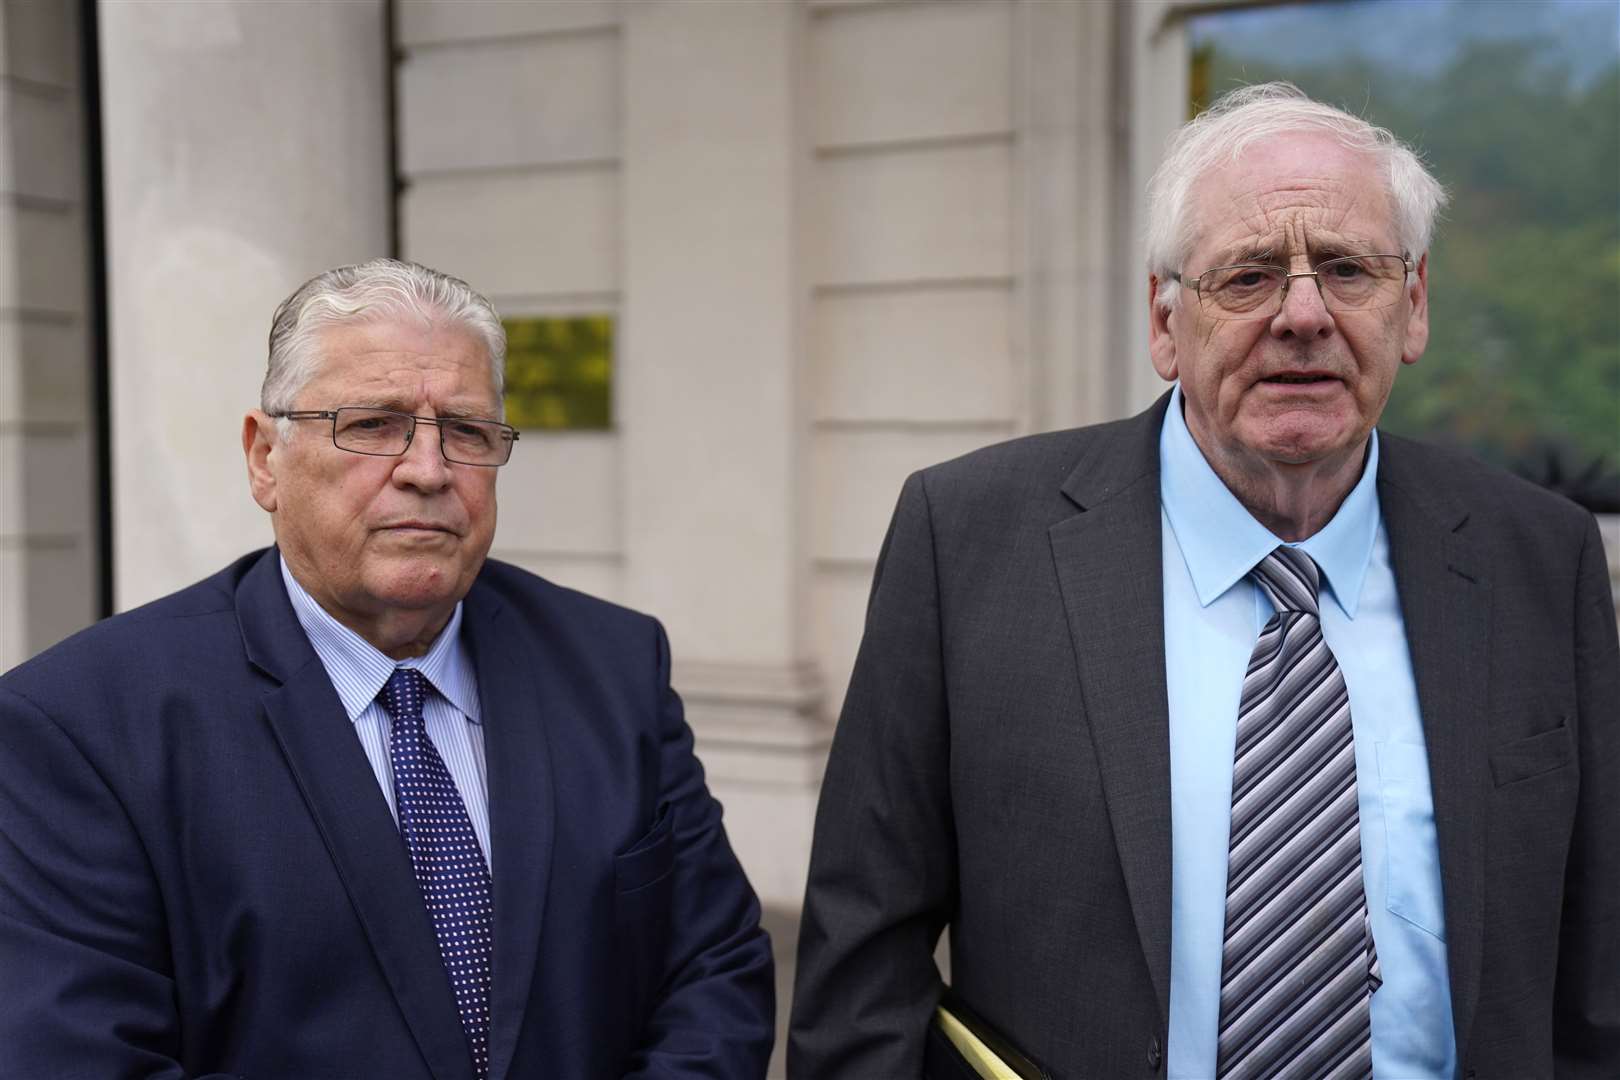 Omagh bomb campaigners Stanley McCombe, left, and Michael Gallagher (Brian Lawless/PA)